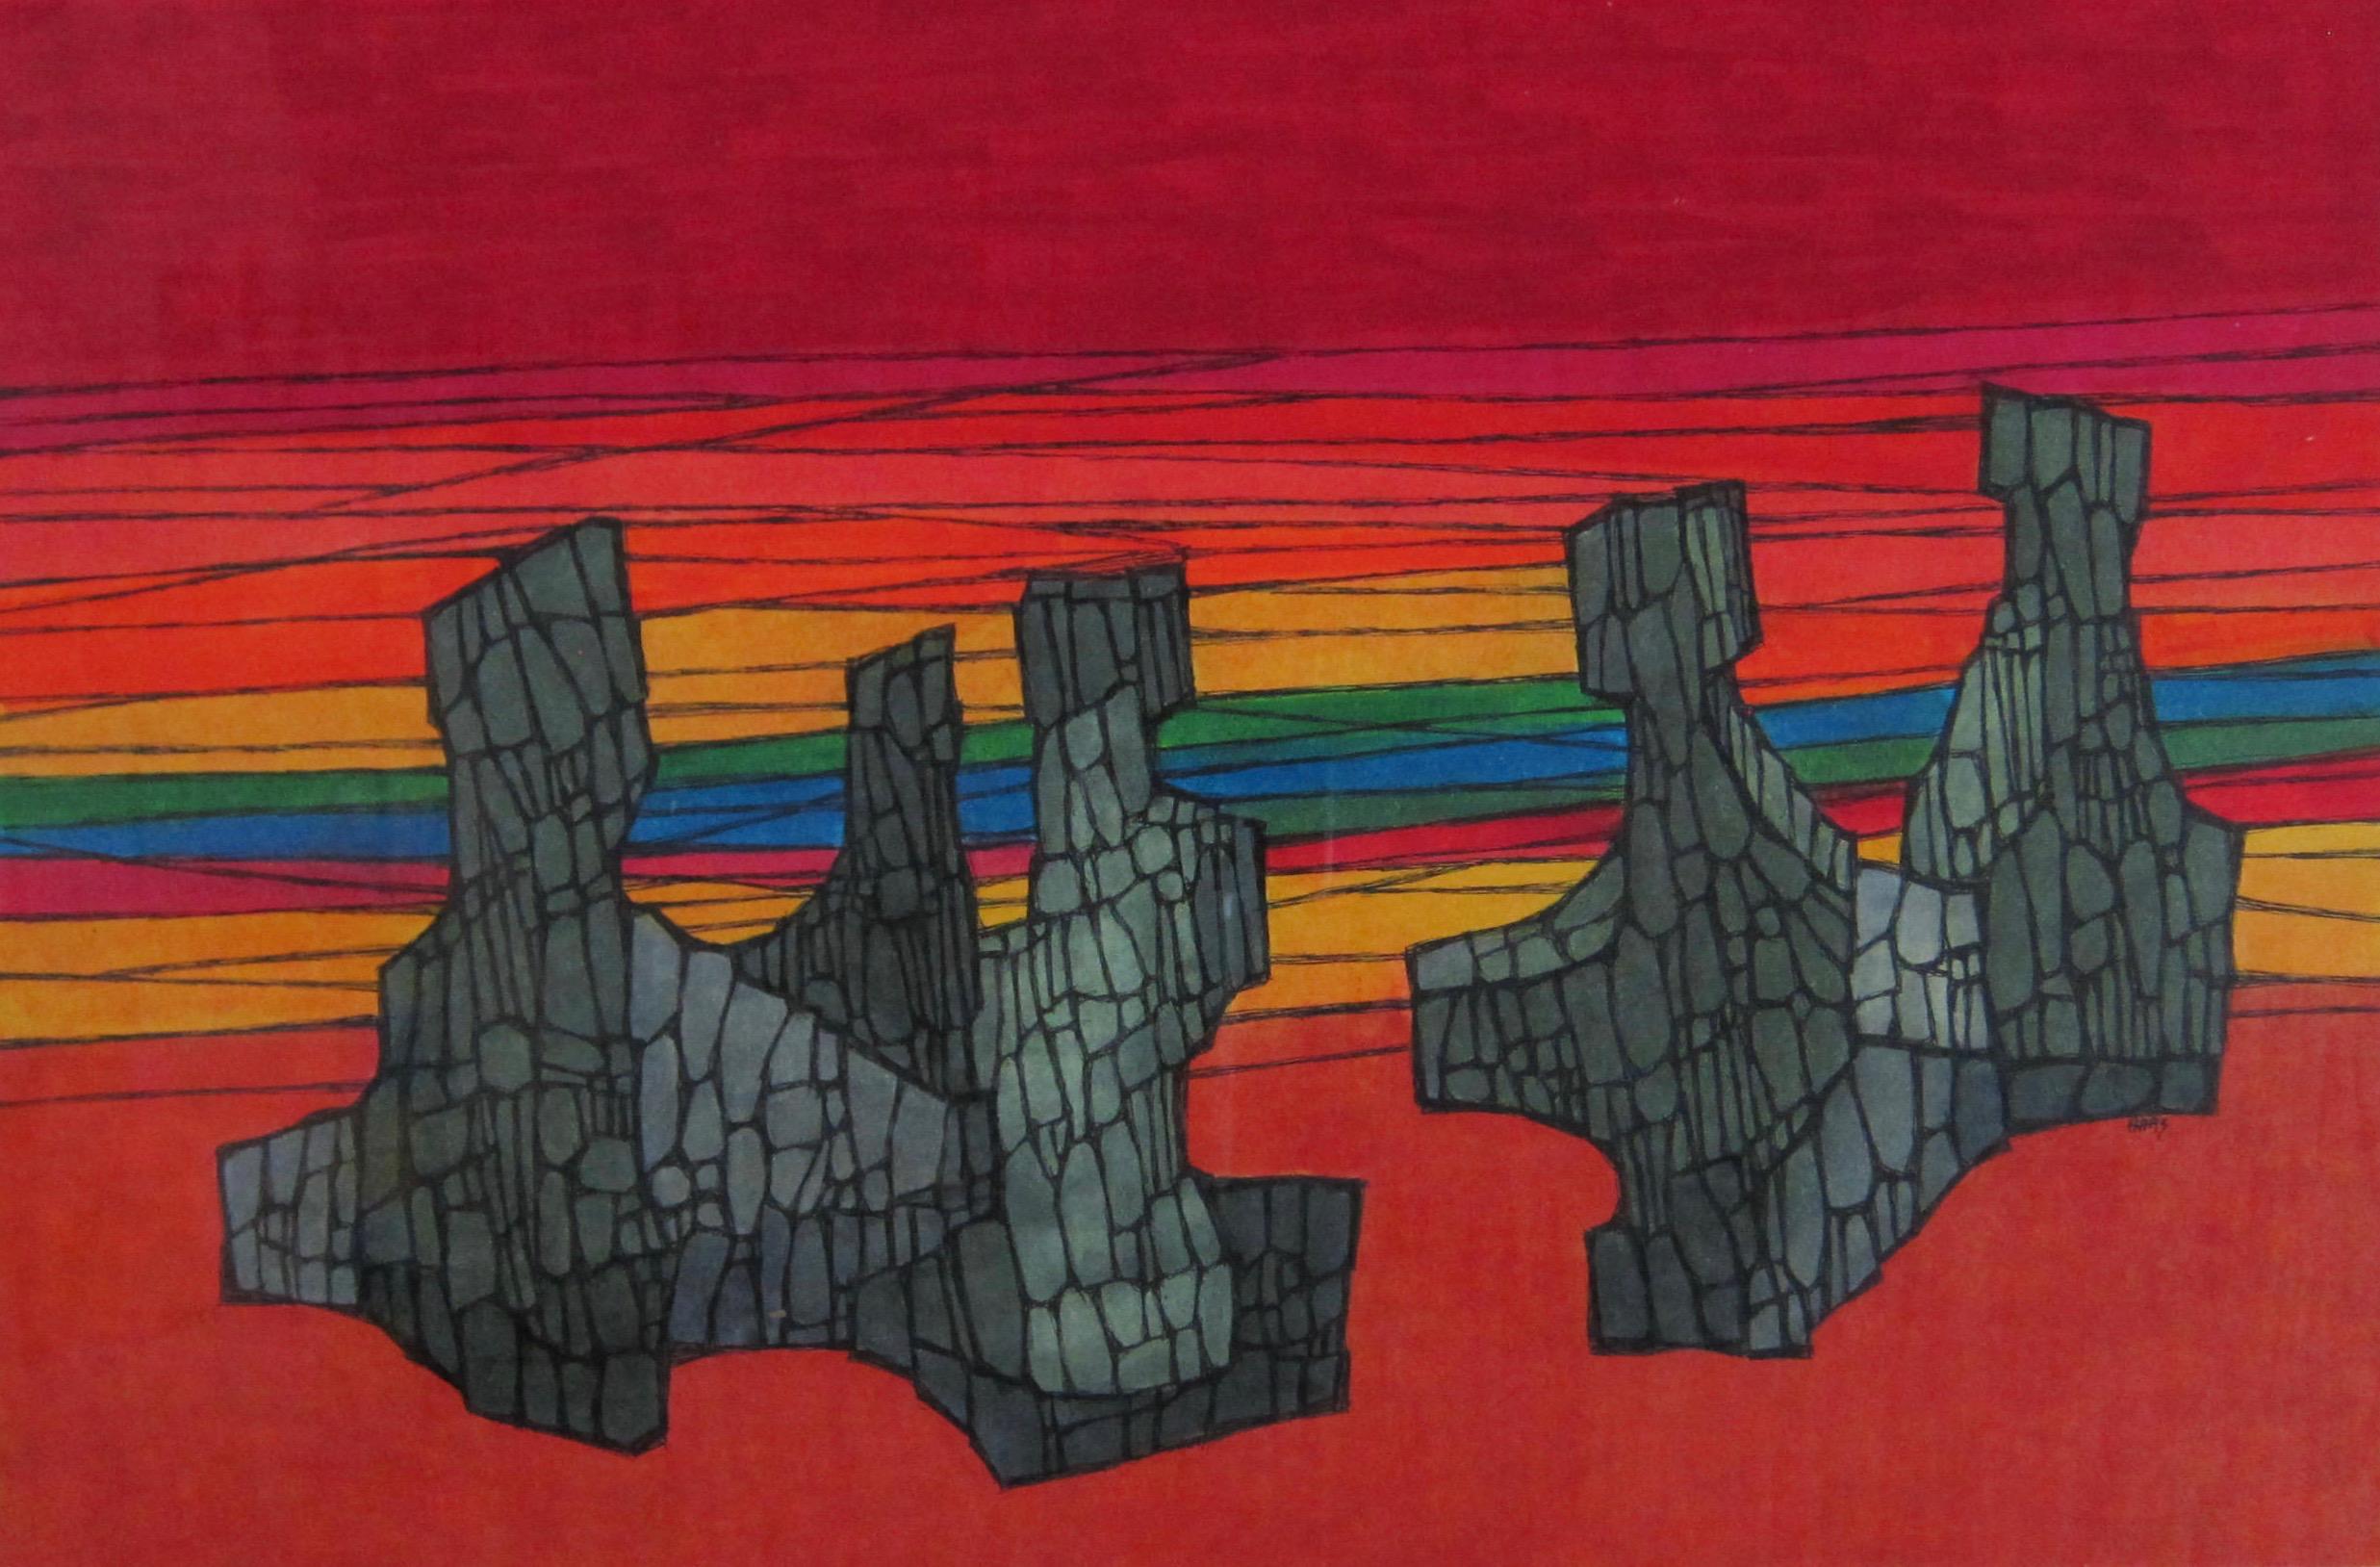 Colorful abstract painting by San Francisco Bay Area artist Hildegarde Haas depicting rock formations floating in a red and rainbow colored background. This work was not titled by the artist so interpretation is up to the viewer.  Haas loved to